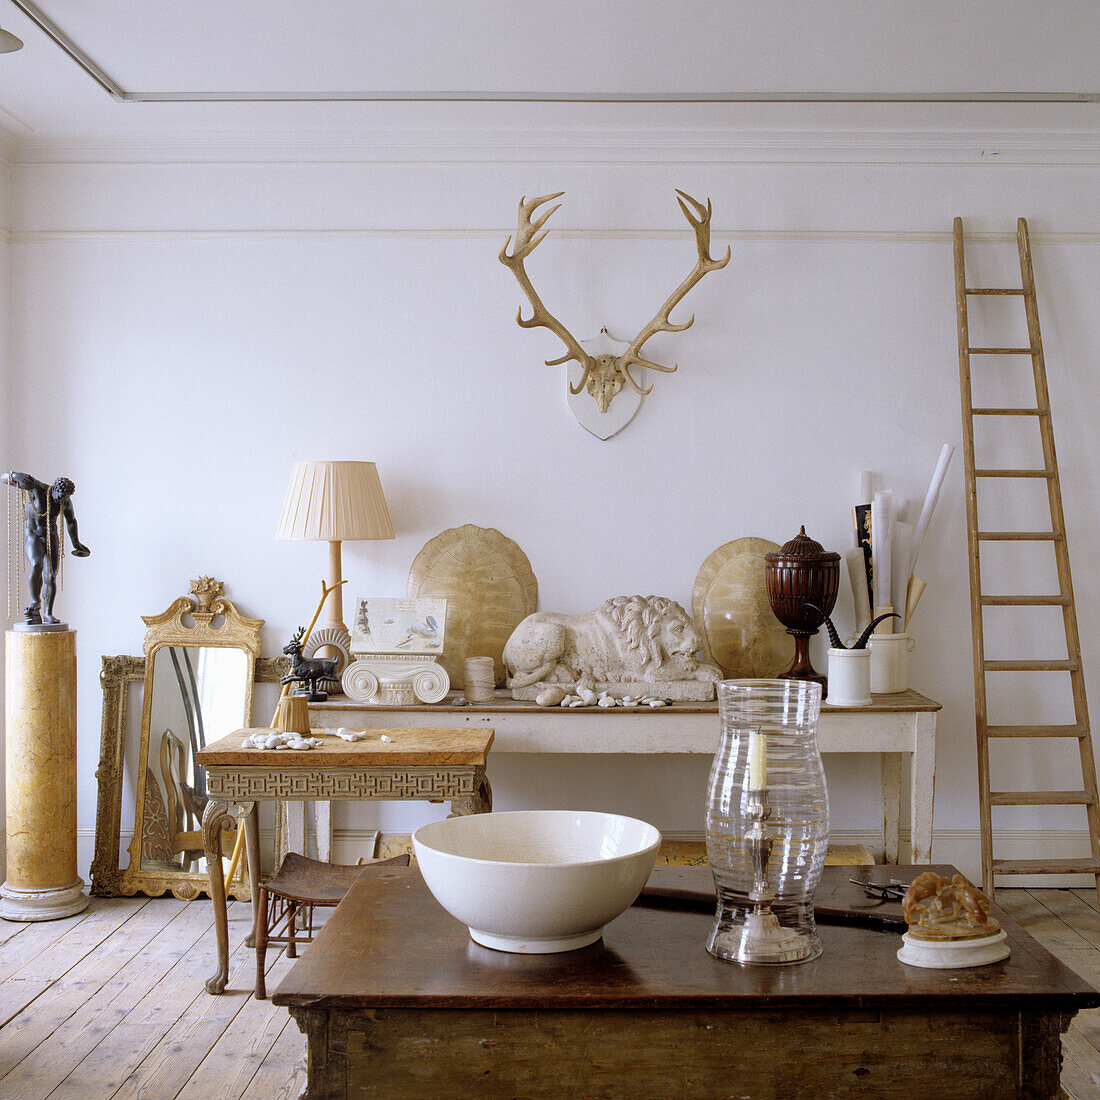 Console table with antiques and objets d'art, antlers on wall